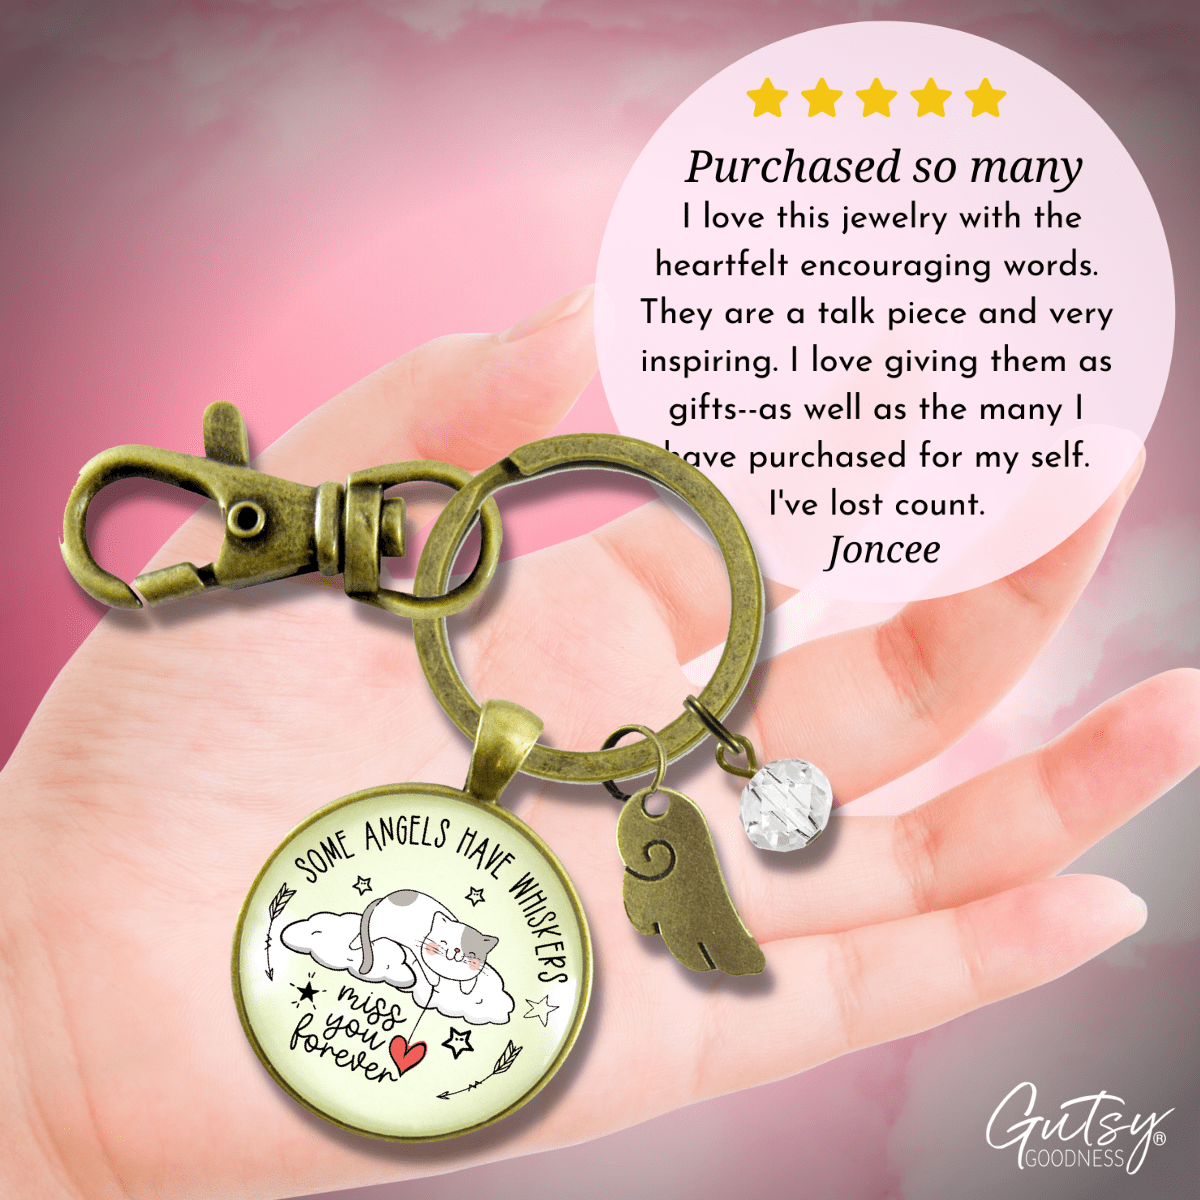 Cat Memorial Keychain Some Angels Have Whiskers - Gutsy Goodness Handmade Jewelry;Cat Memorial Keychain Some Angels Have Whiskers - Gutsy Goodness Handmade Jewelry Gifts